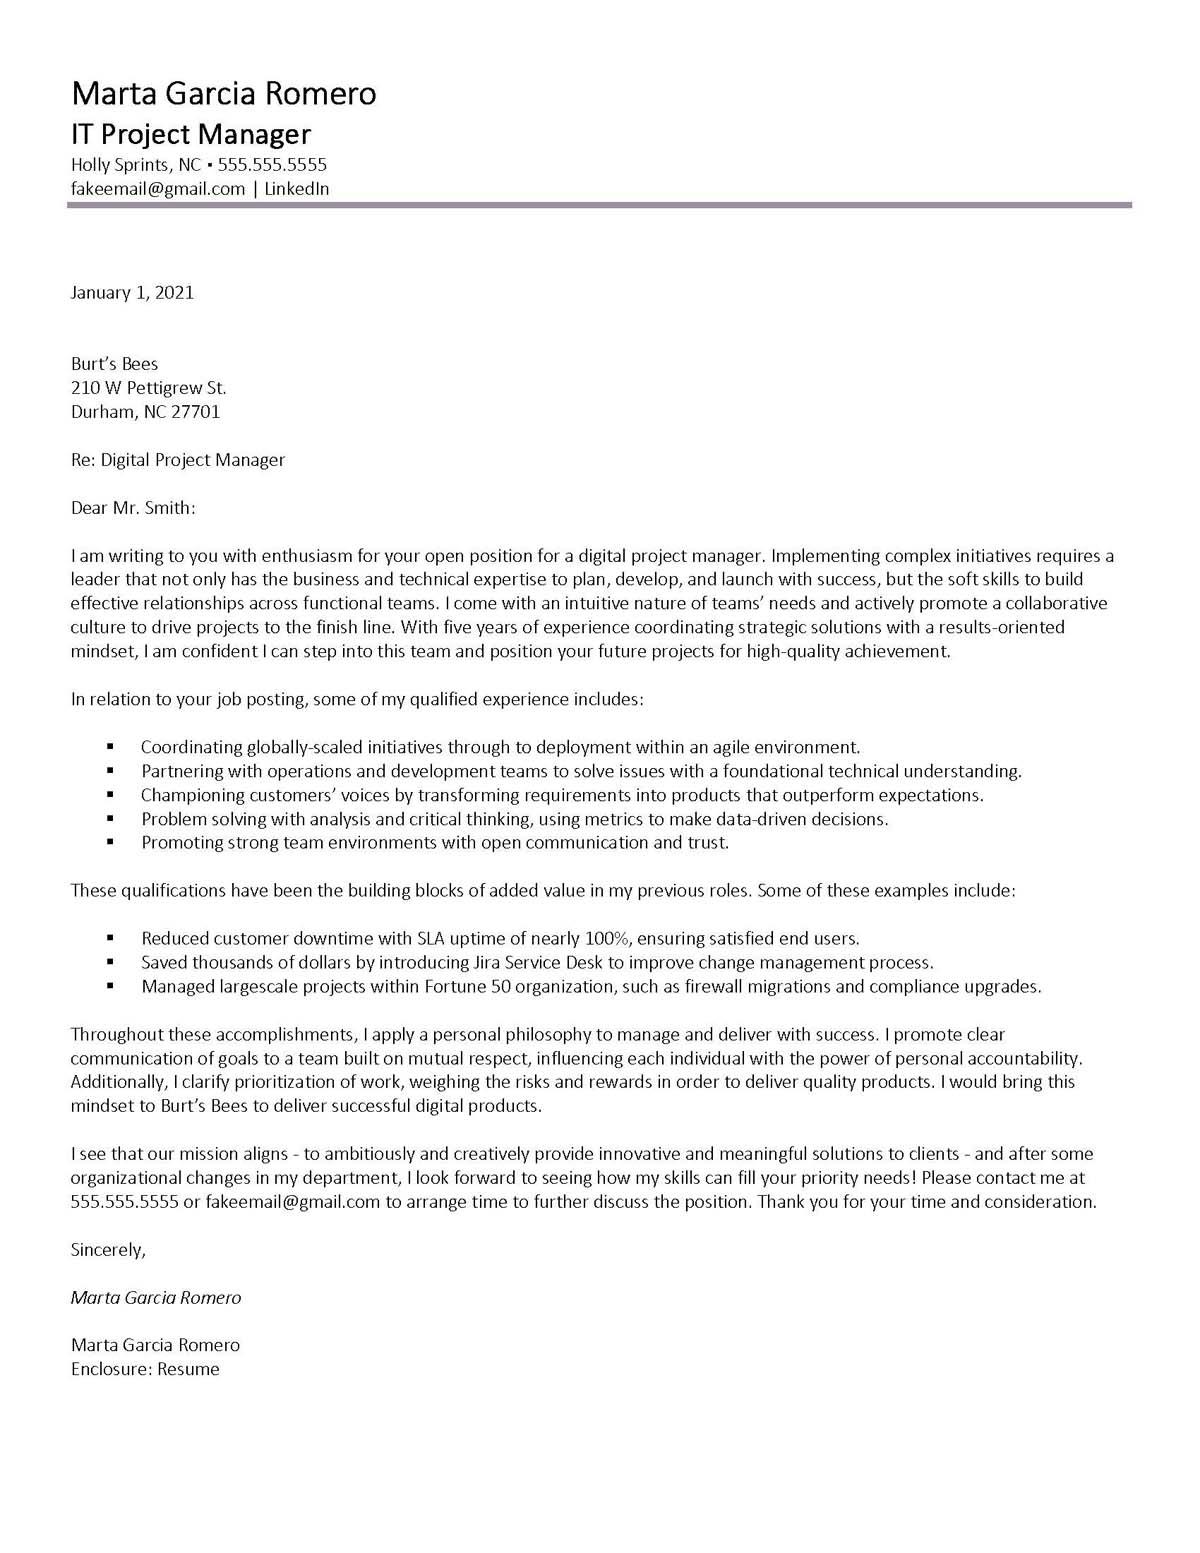 Sample cover letter: Project Management, Mid Experience, Response to Ad